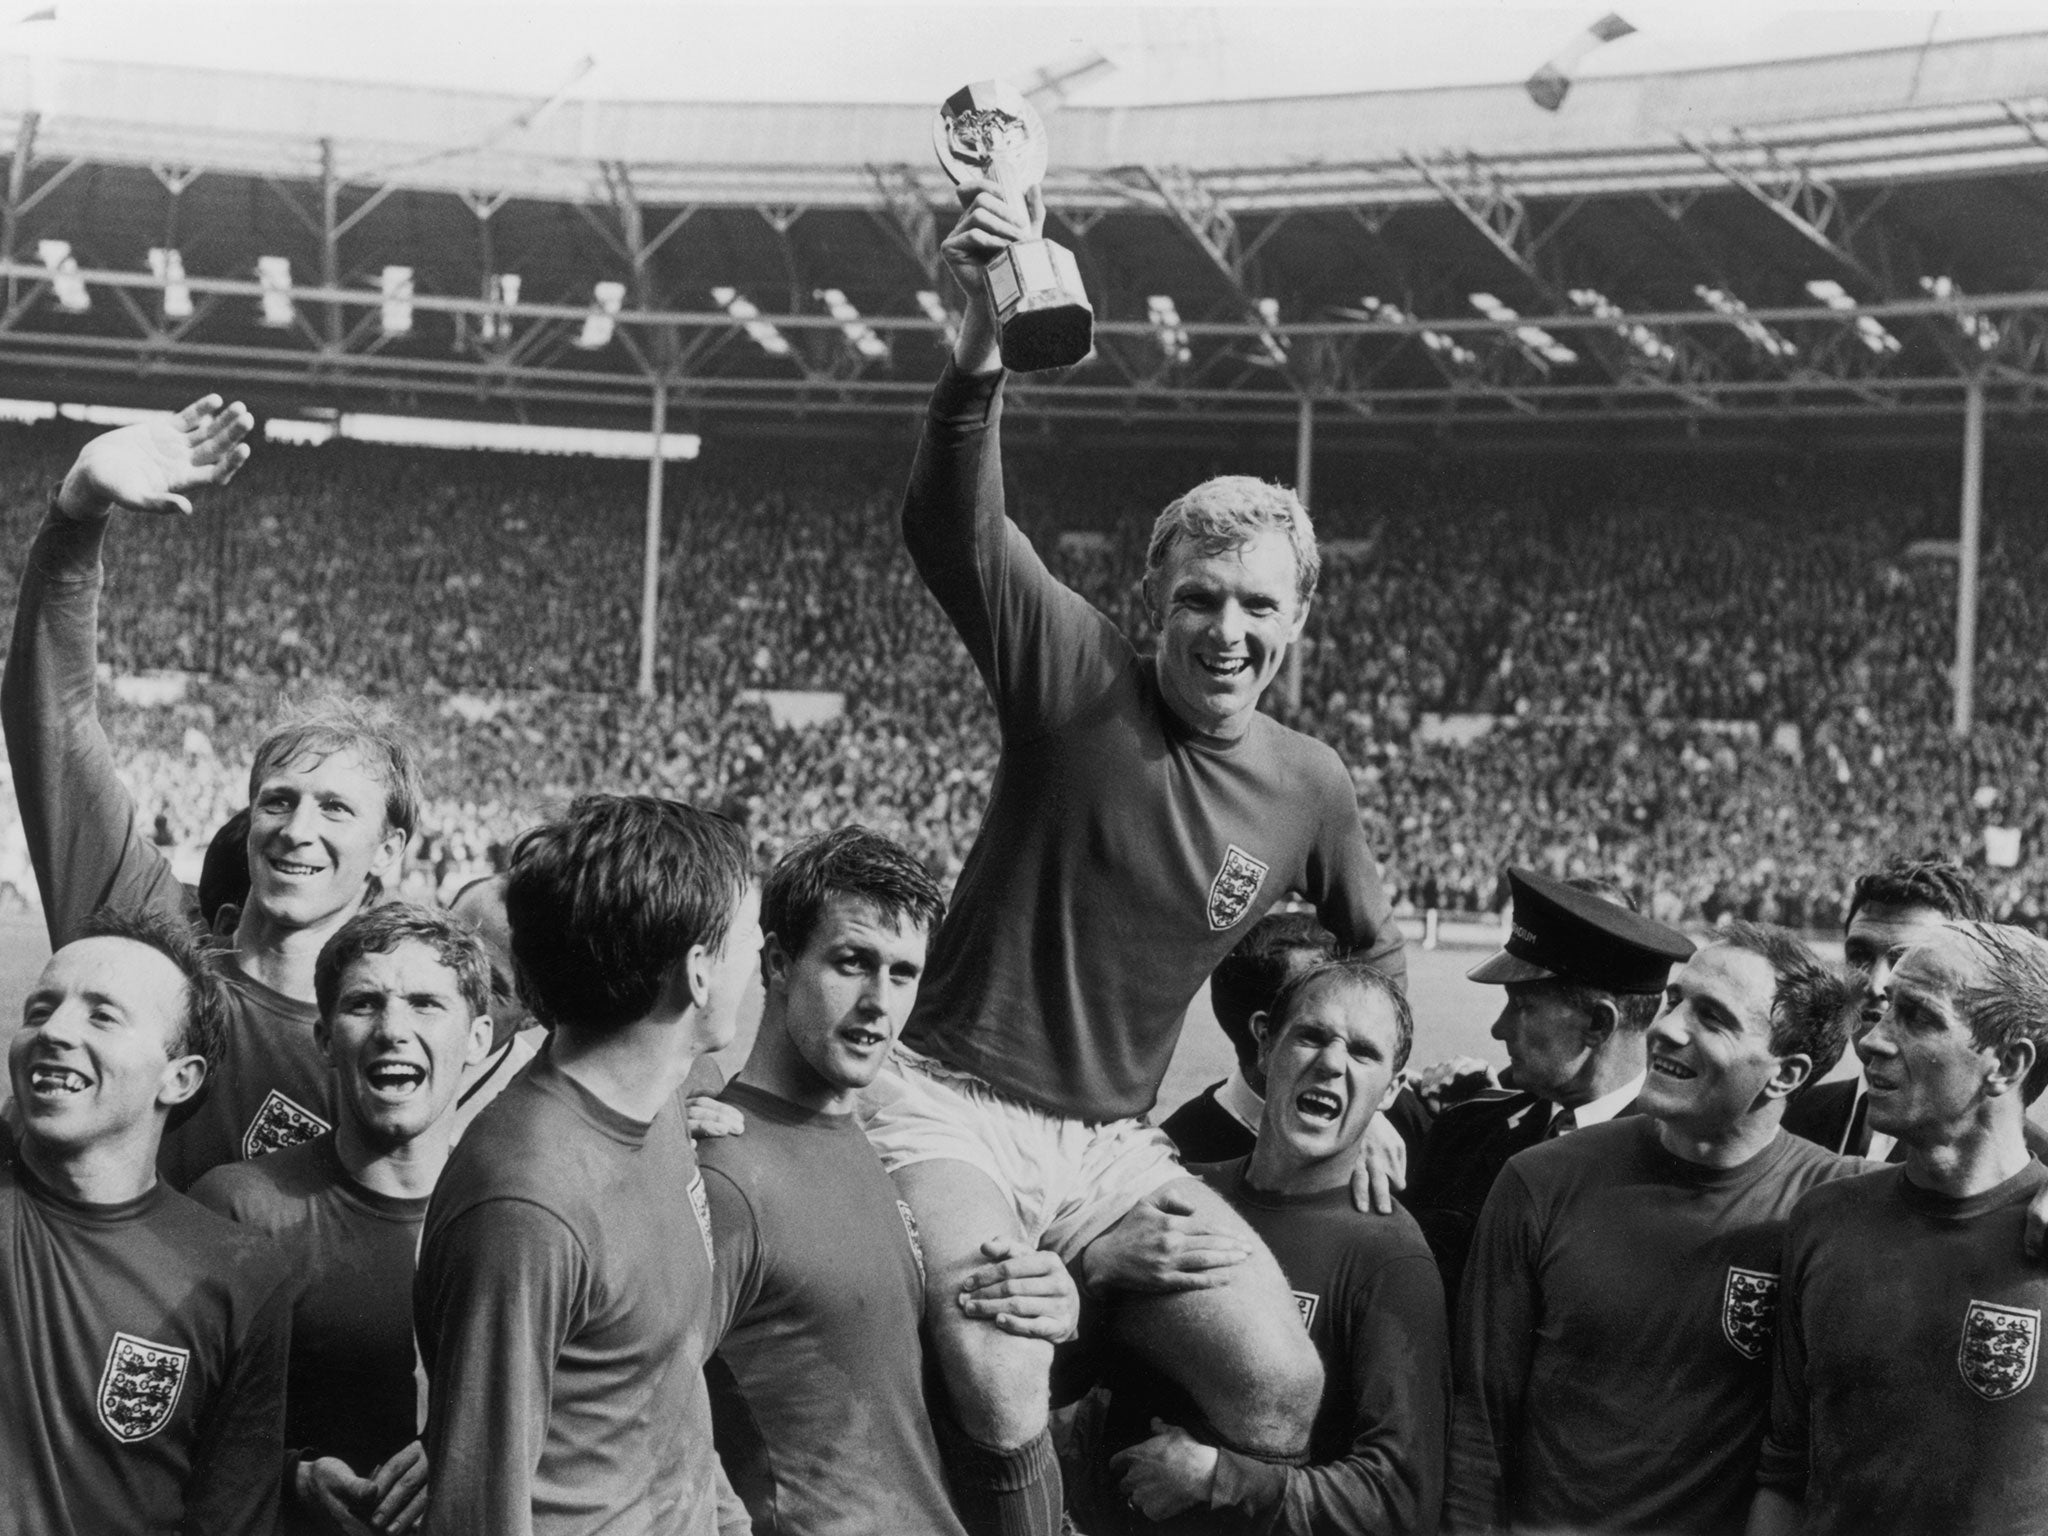 Bobby Moore holding aloft the Jules Rimet trophy as he is carried by his teammates following England’s victory over Germany in the 1966 World Cup final